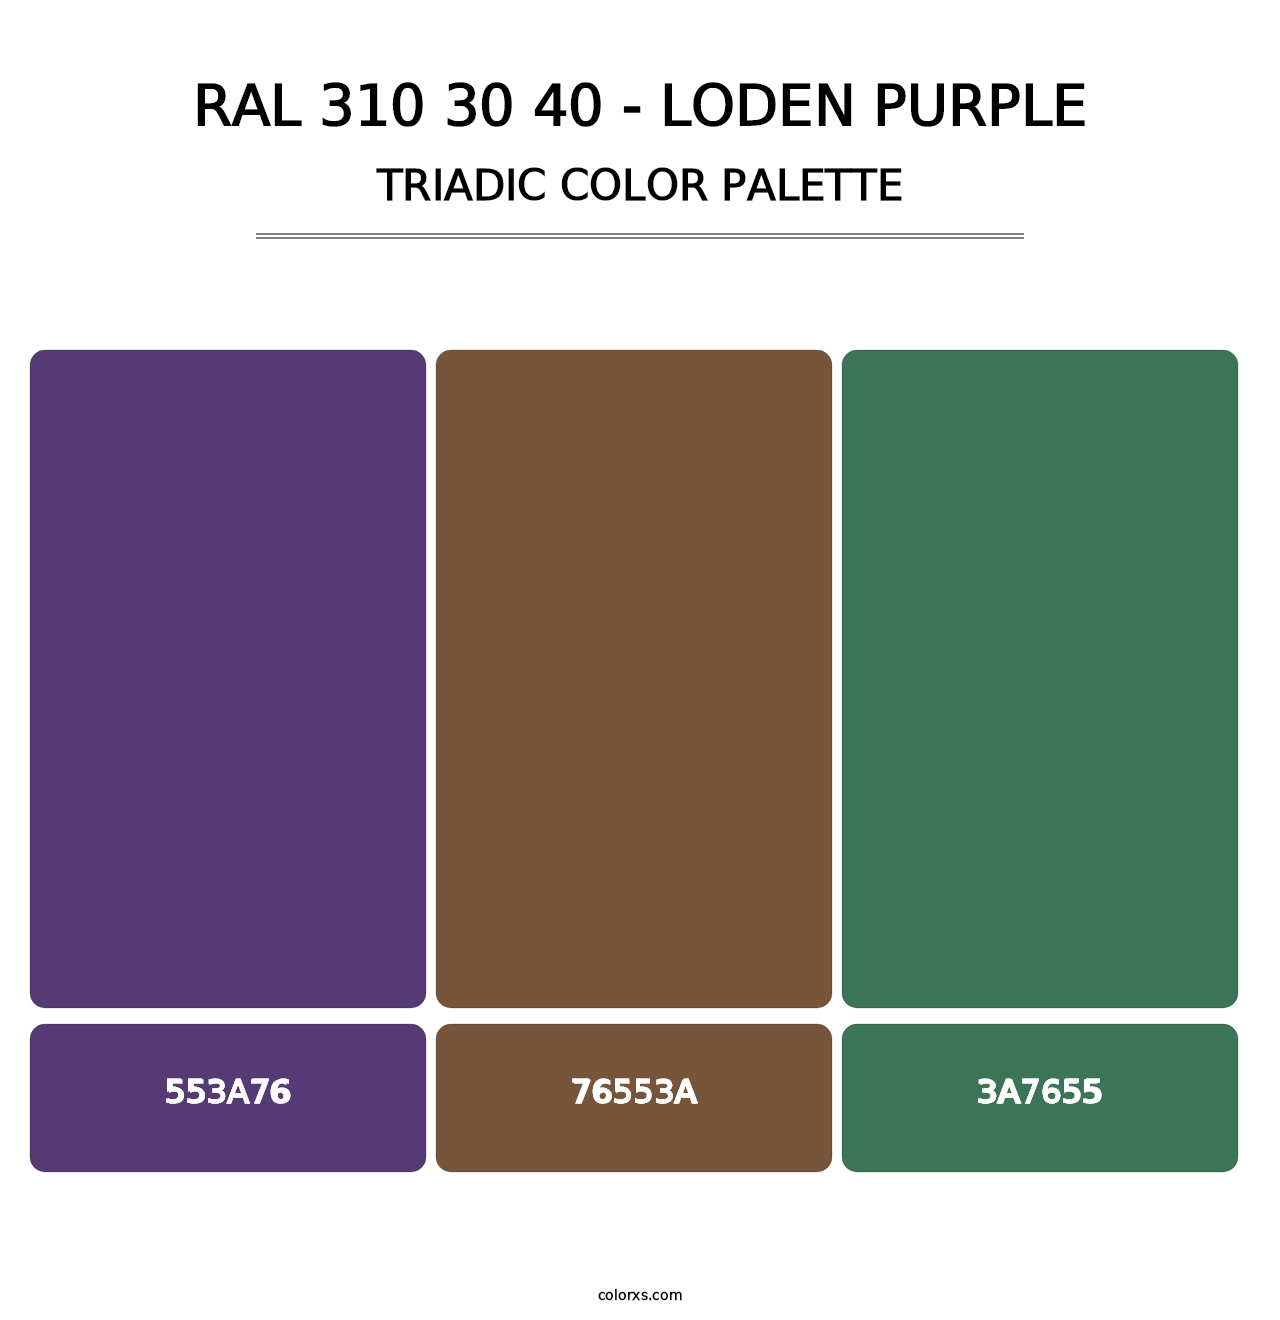 RAL 310 30 40 - Loden Purple - Triadic Color Palette